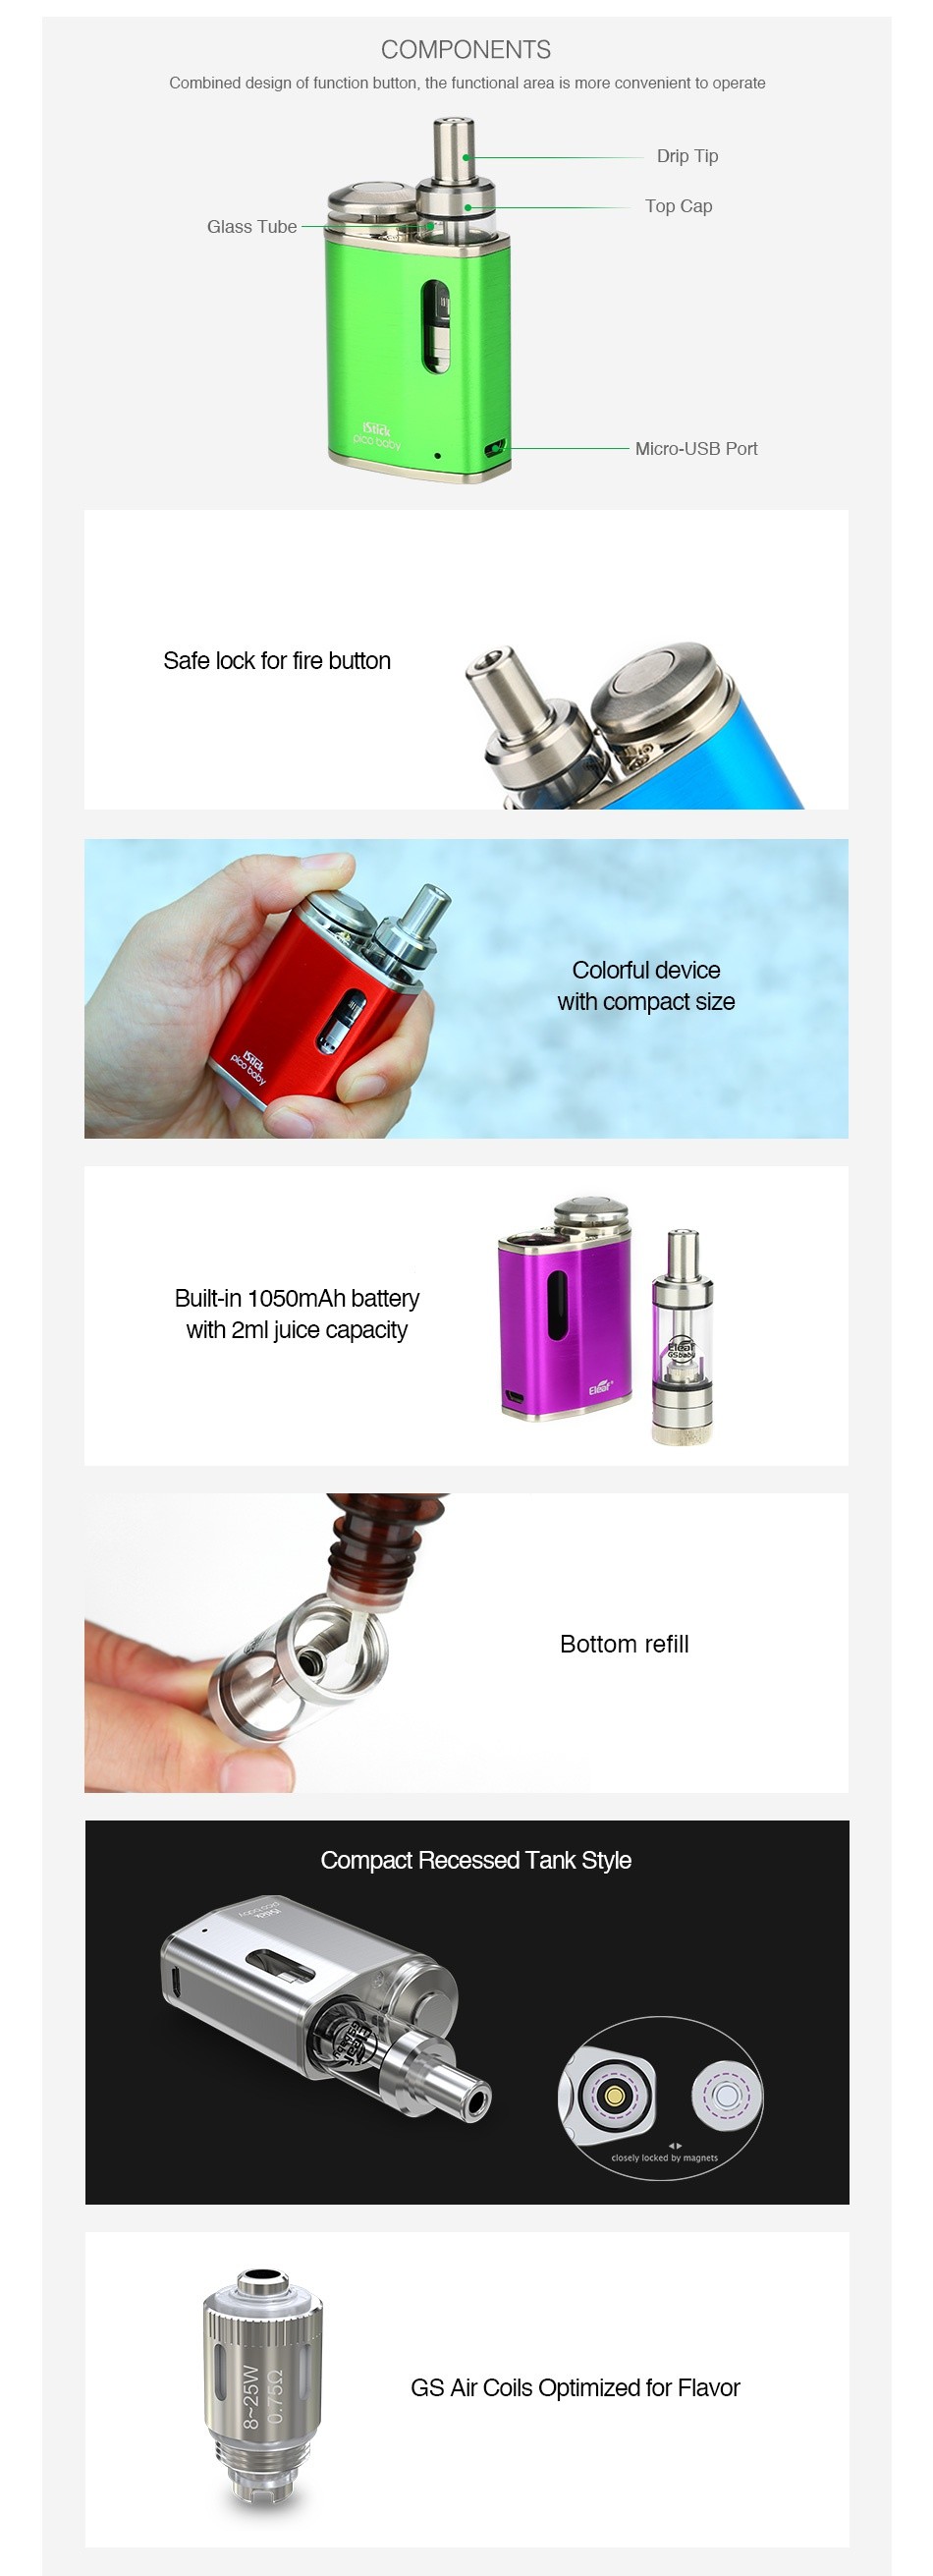 Eleaf iStick Pico Baby Starter Kit 1050mAh COMPONENTS Combined design of function button the functional area is more ent to operate Glass Tube Safe lock for fire button Colorful device Builit in 1050mAh battery with 2ml juice cap Bottom refil Compact Recessed Tank style Gs Air Coils Optimized for Flavor